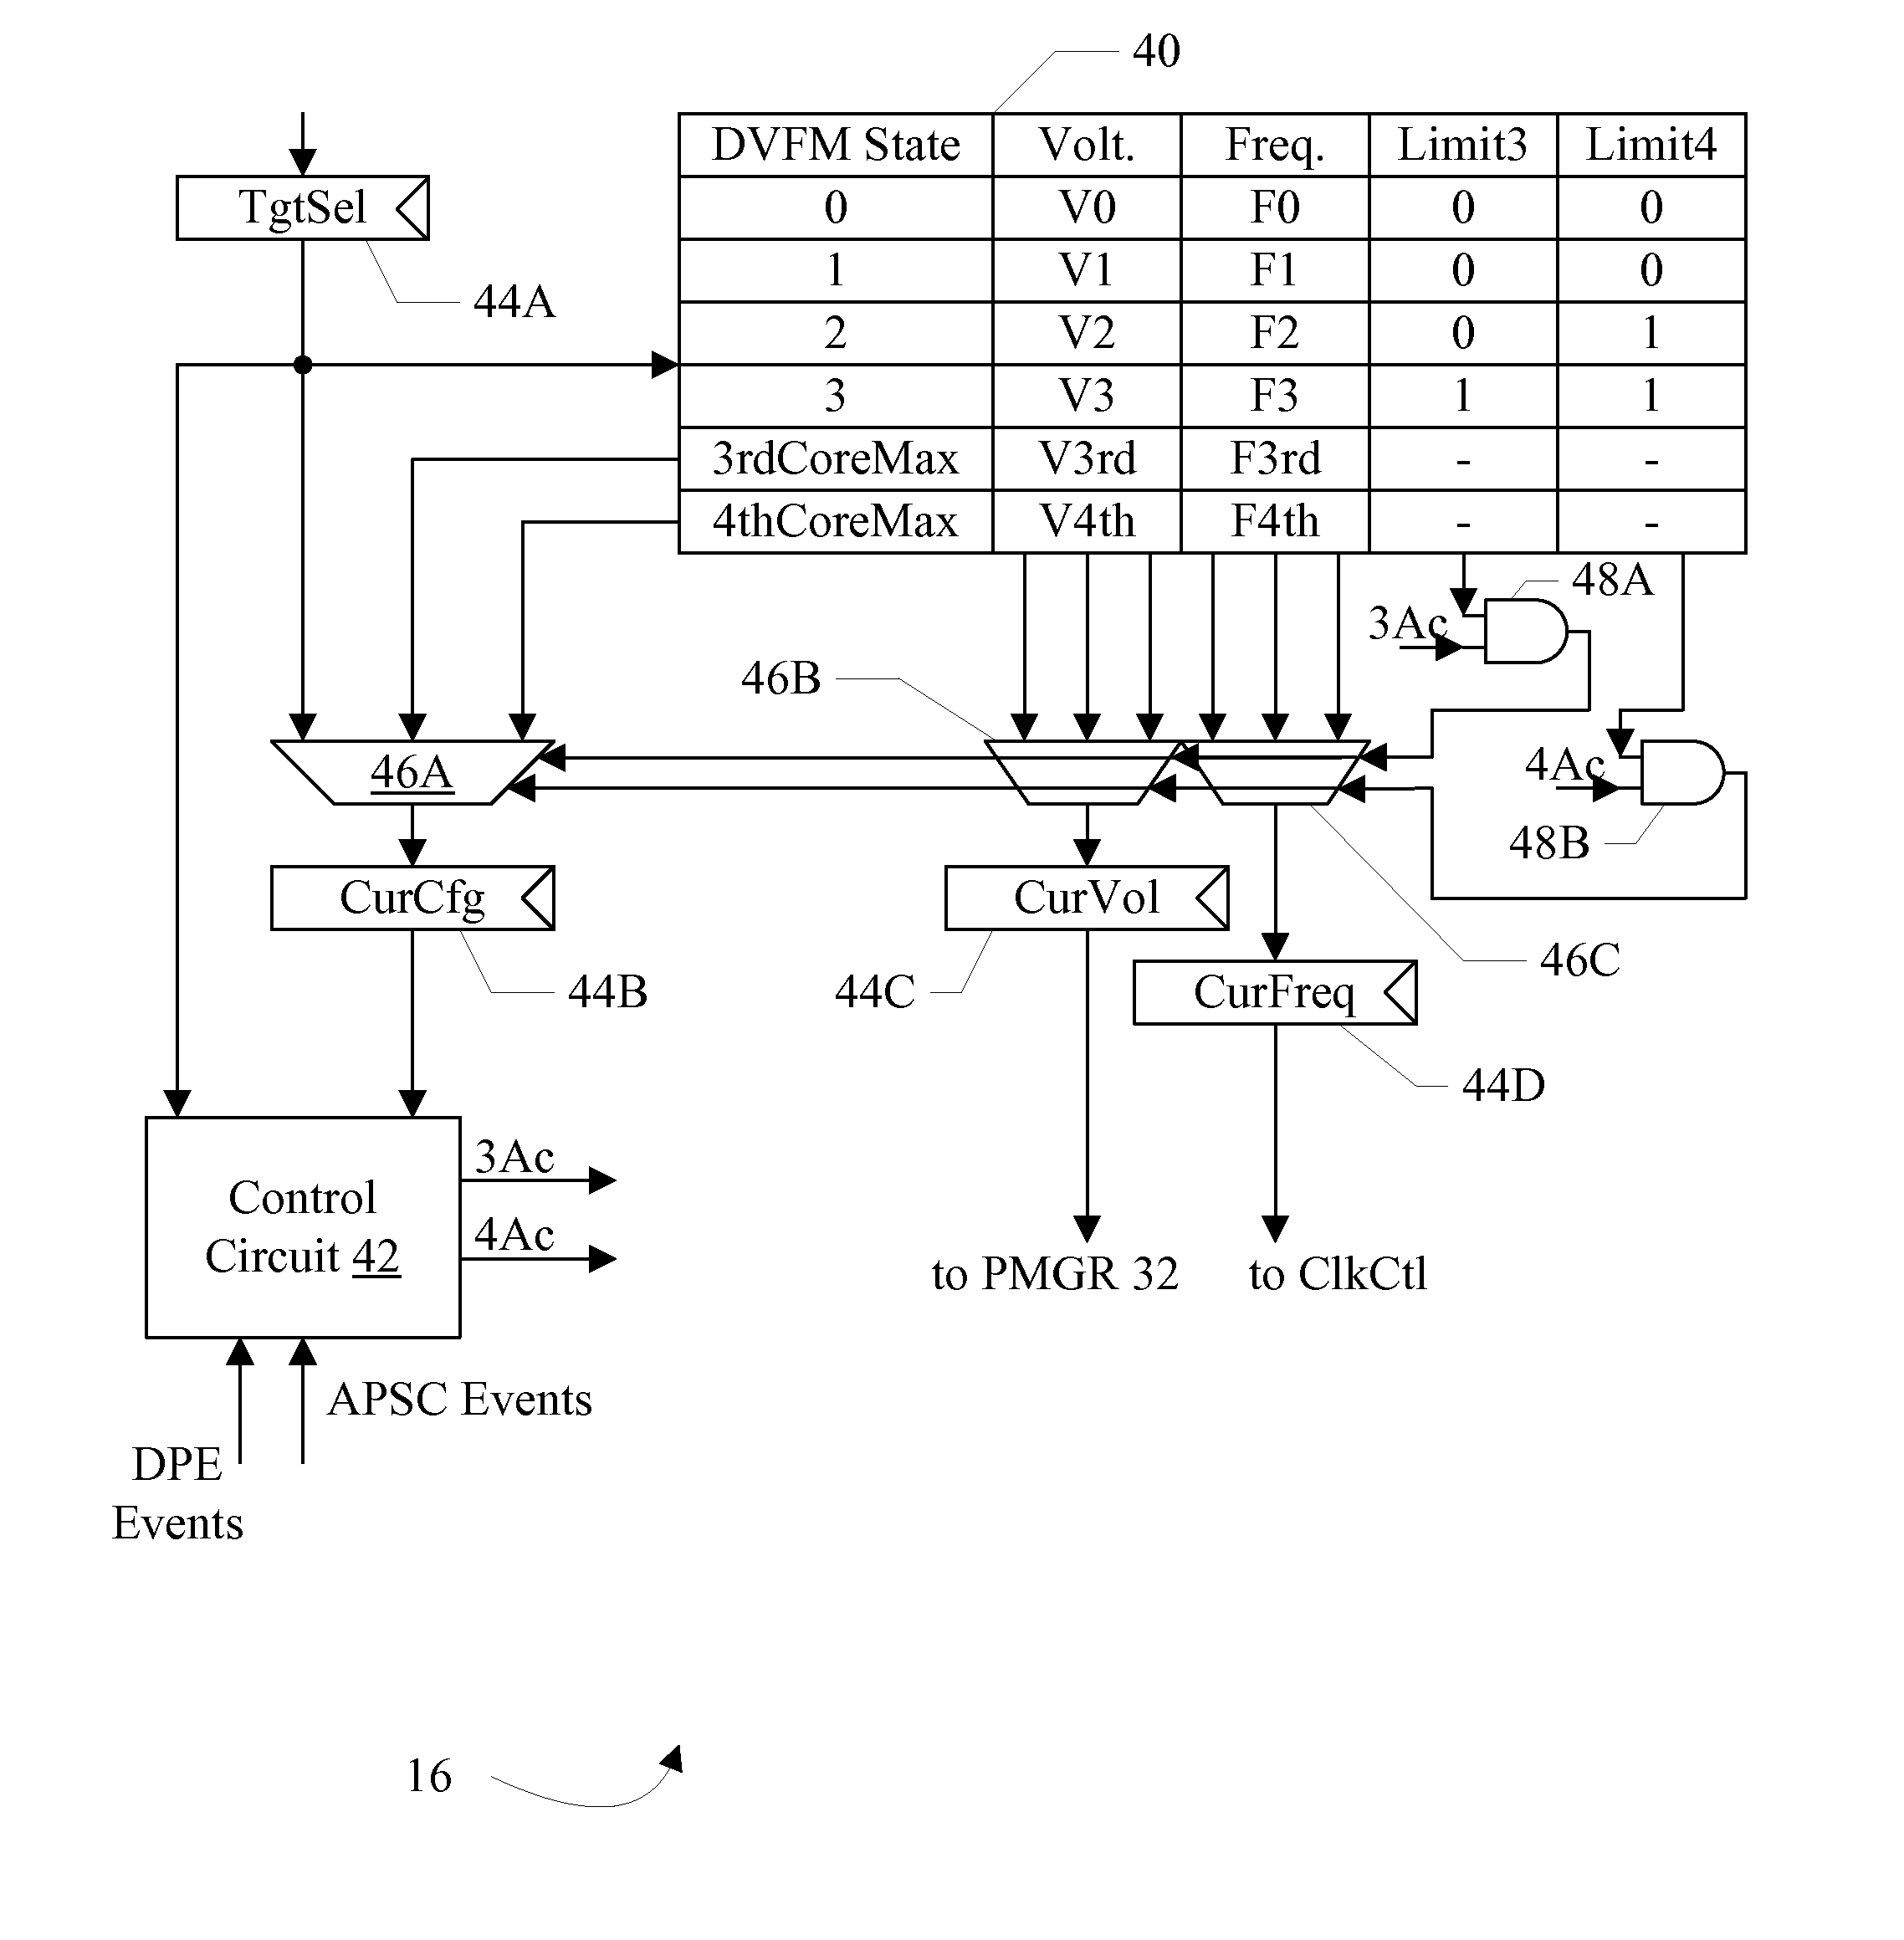 Dynamic voltage and frequency management based on active processors